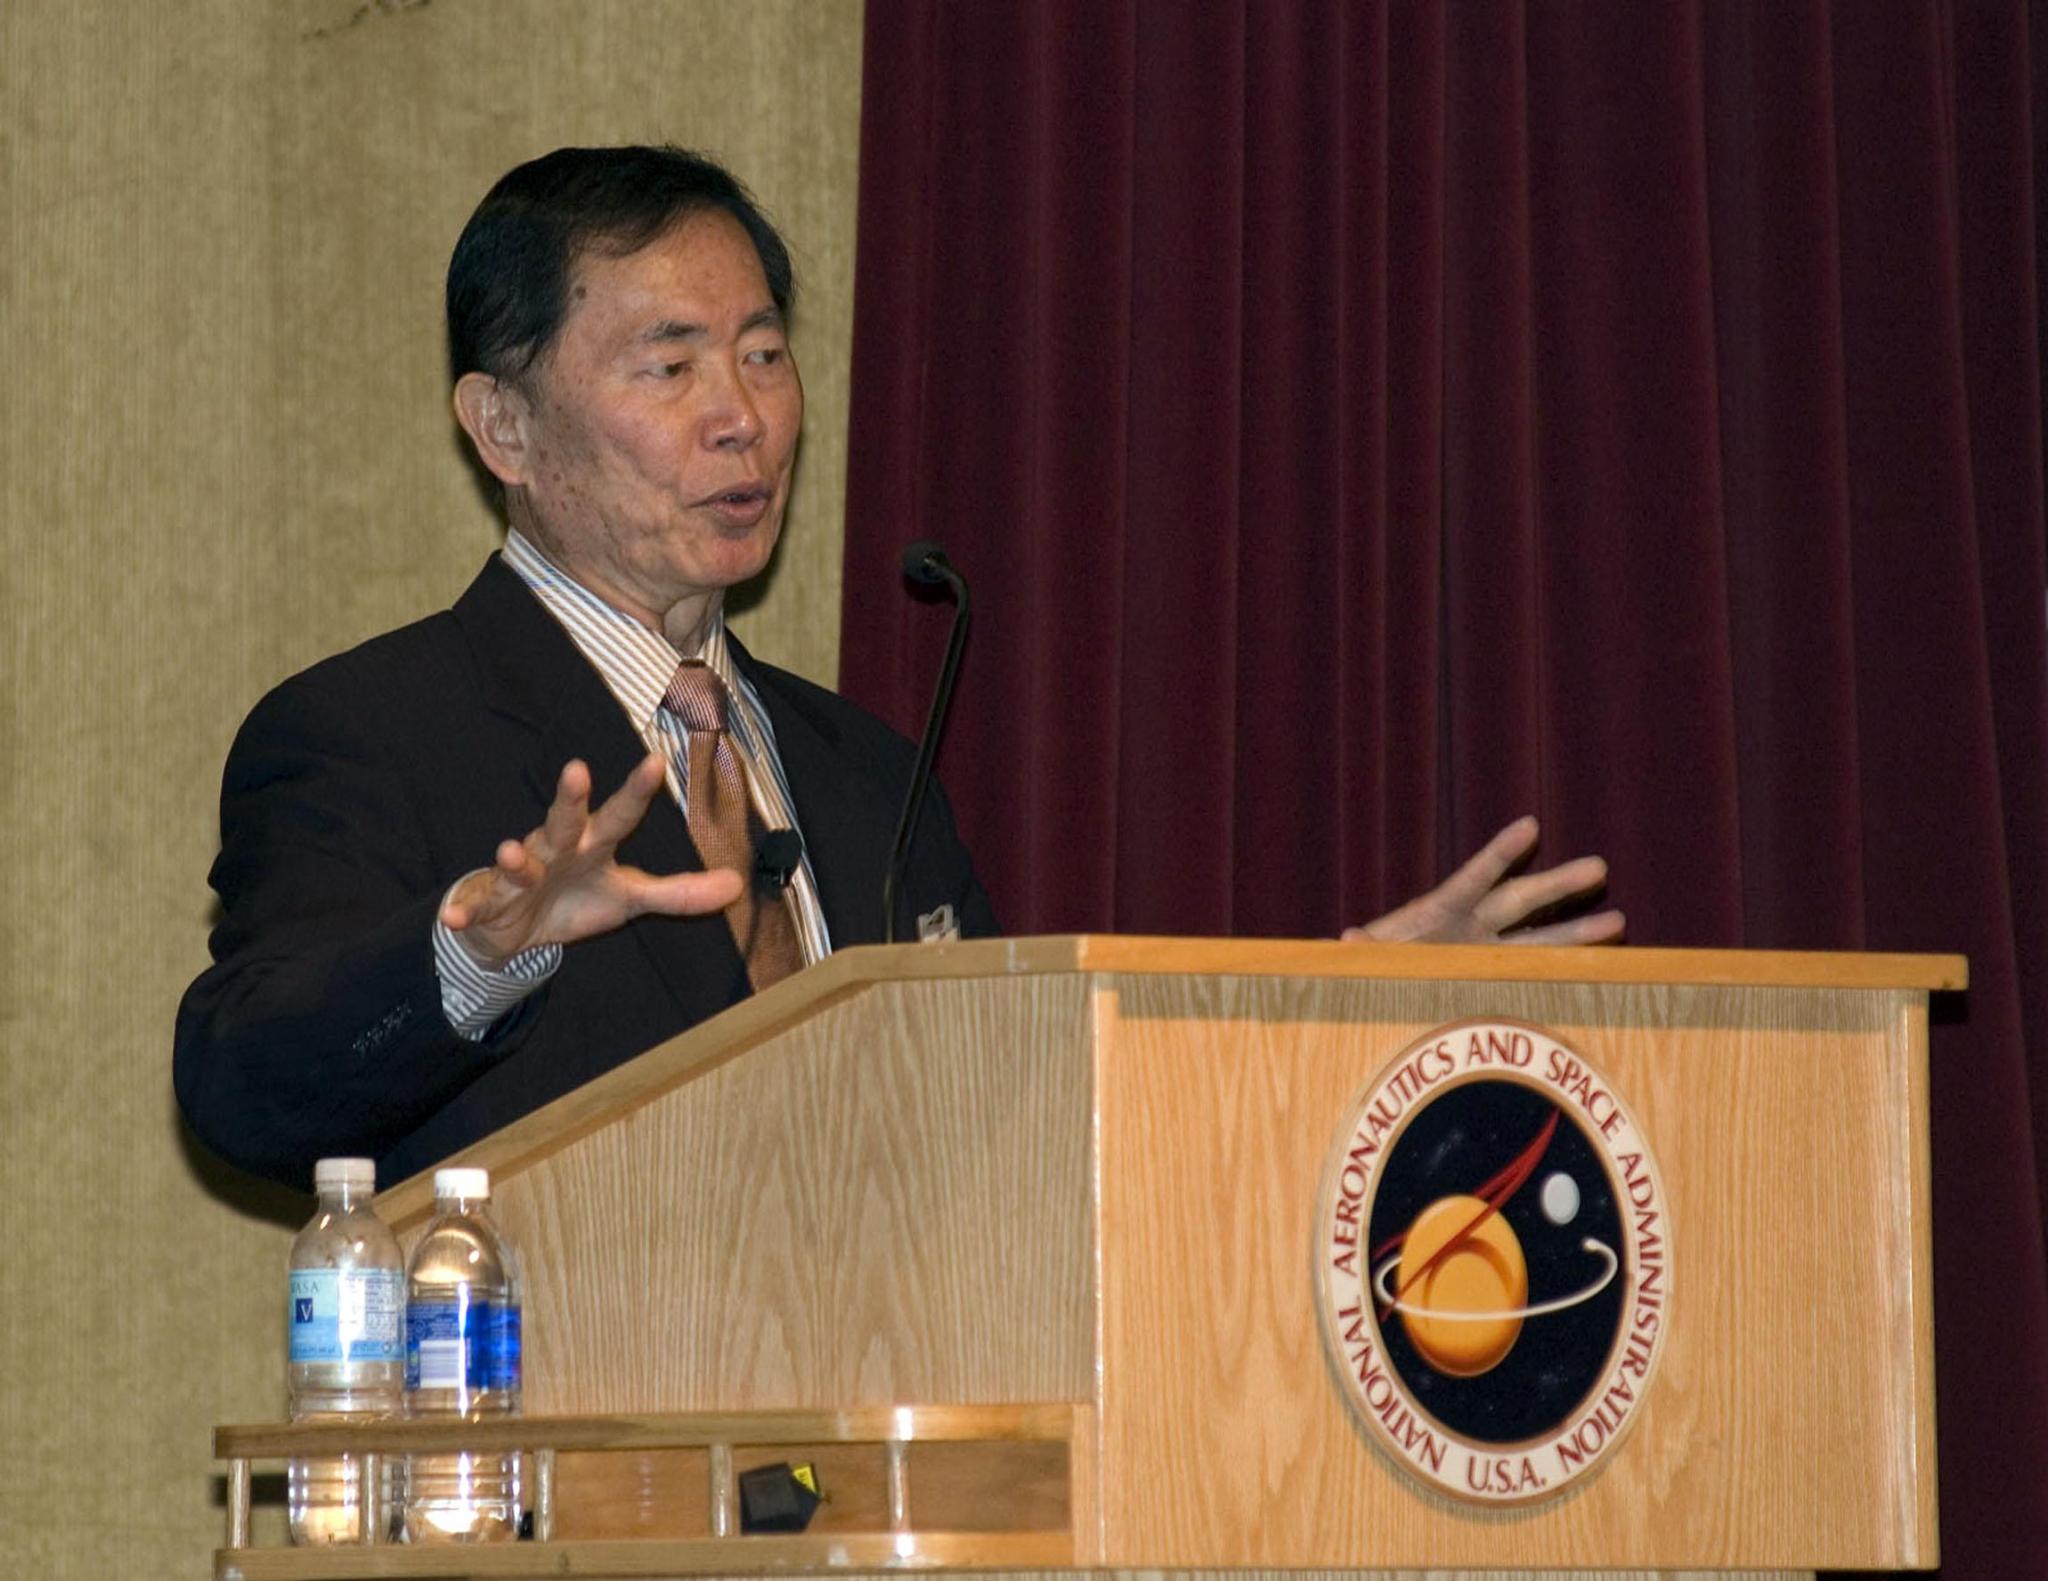 George Takei spoke of his experiences growing up in a Japanese-American internment camp in World War II during his presentation 